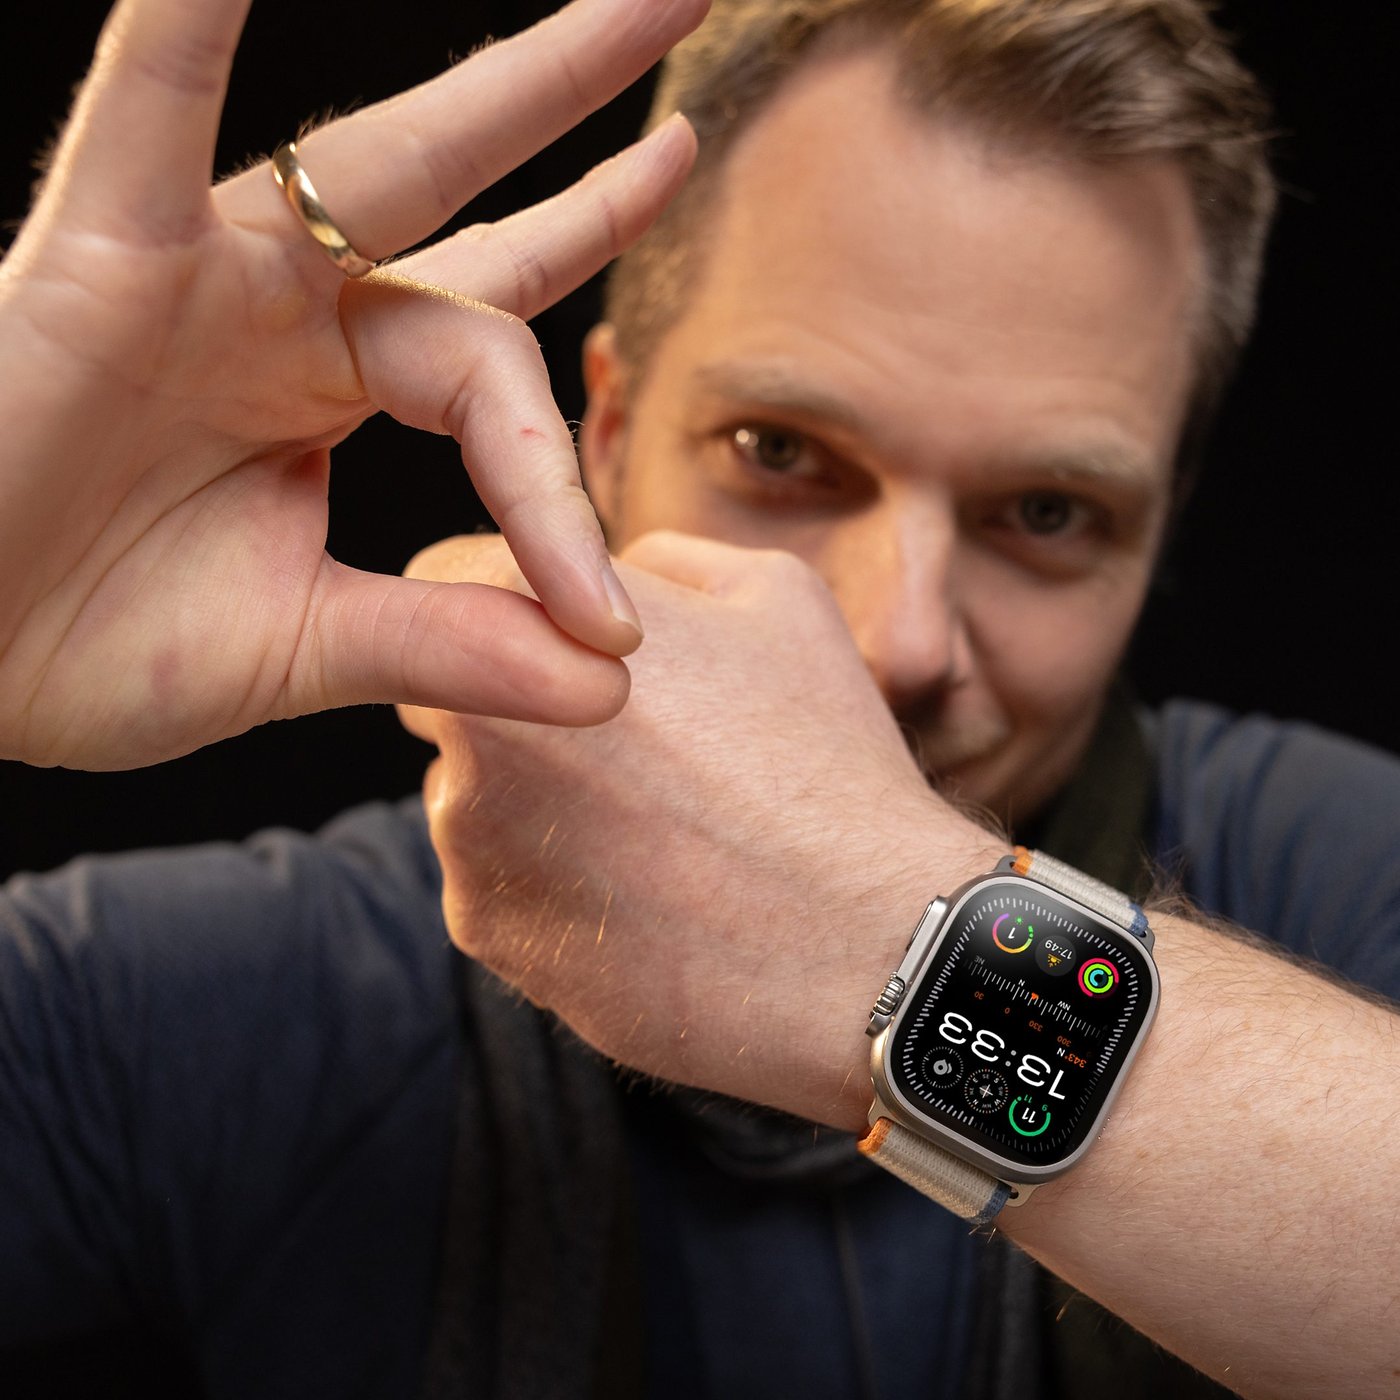 Apple Watch Ultra 2: Hands-on and What's New